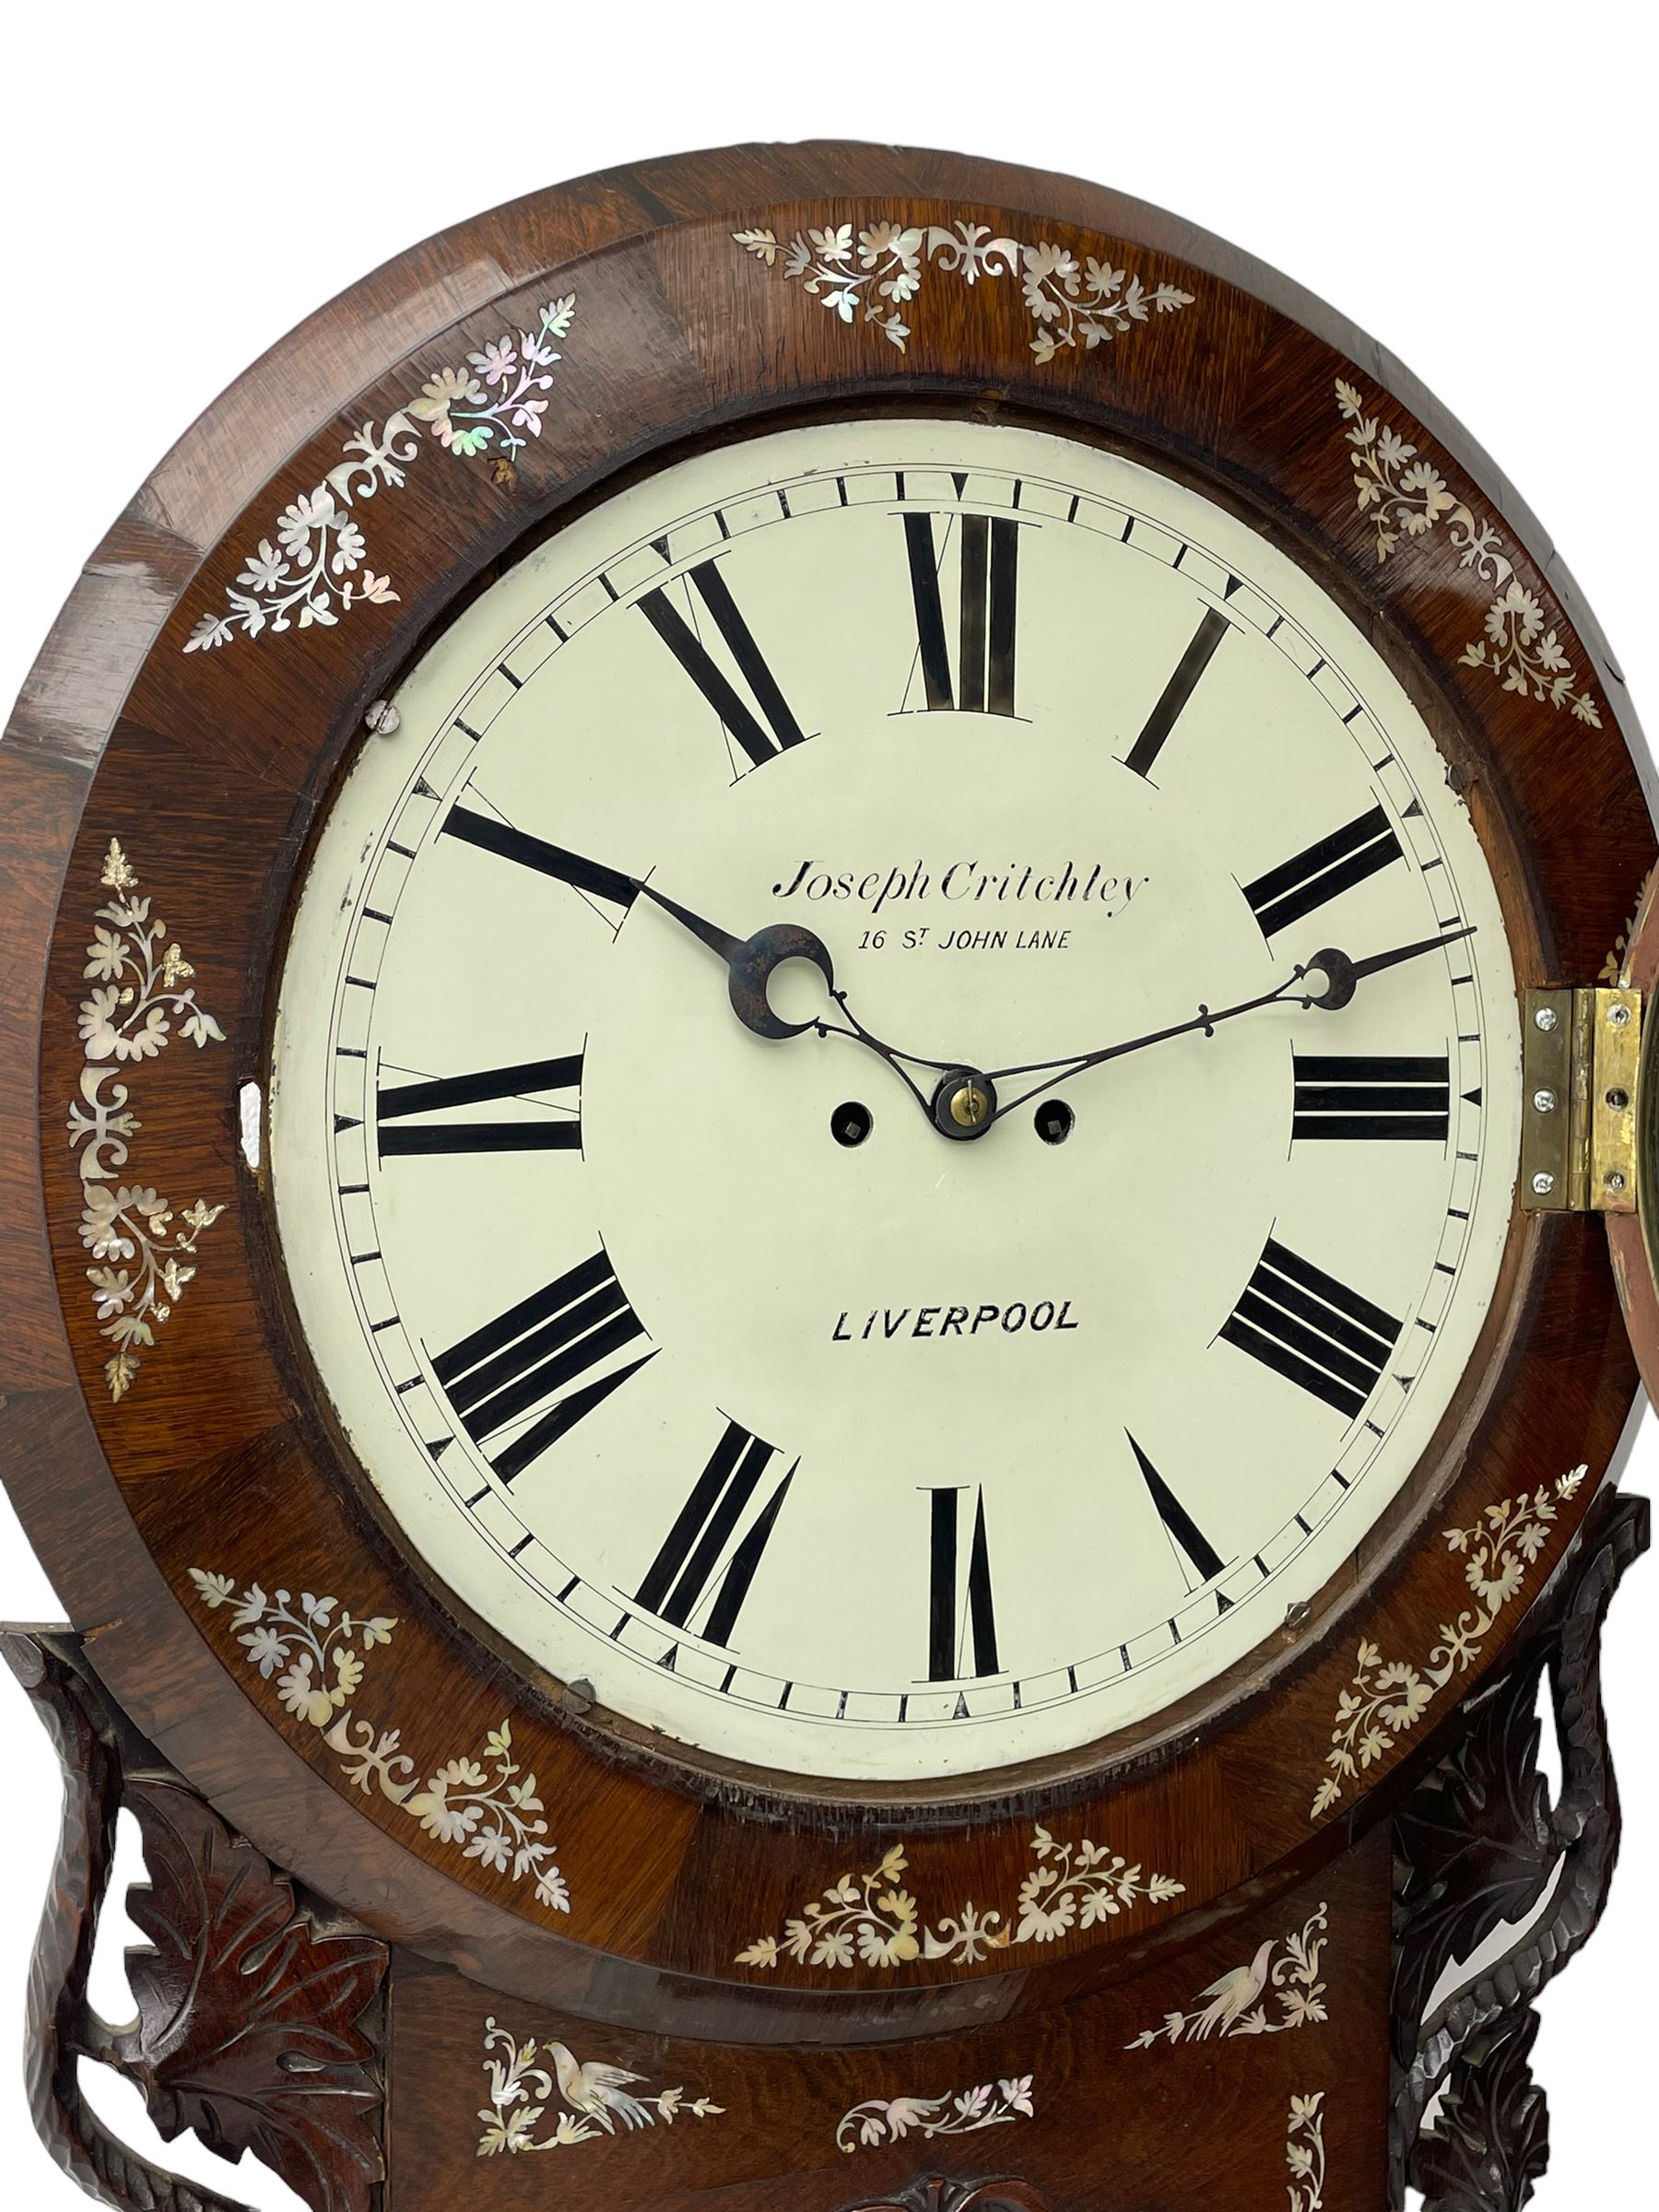 Joseph Critchley of Liverpool - early 19th century twin fusee 8-day rosewood and mother of pearl in - Image 8 of 17